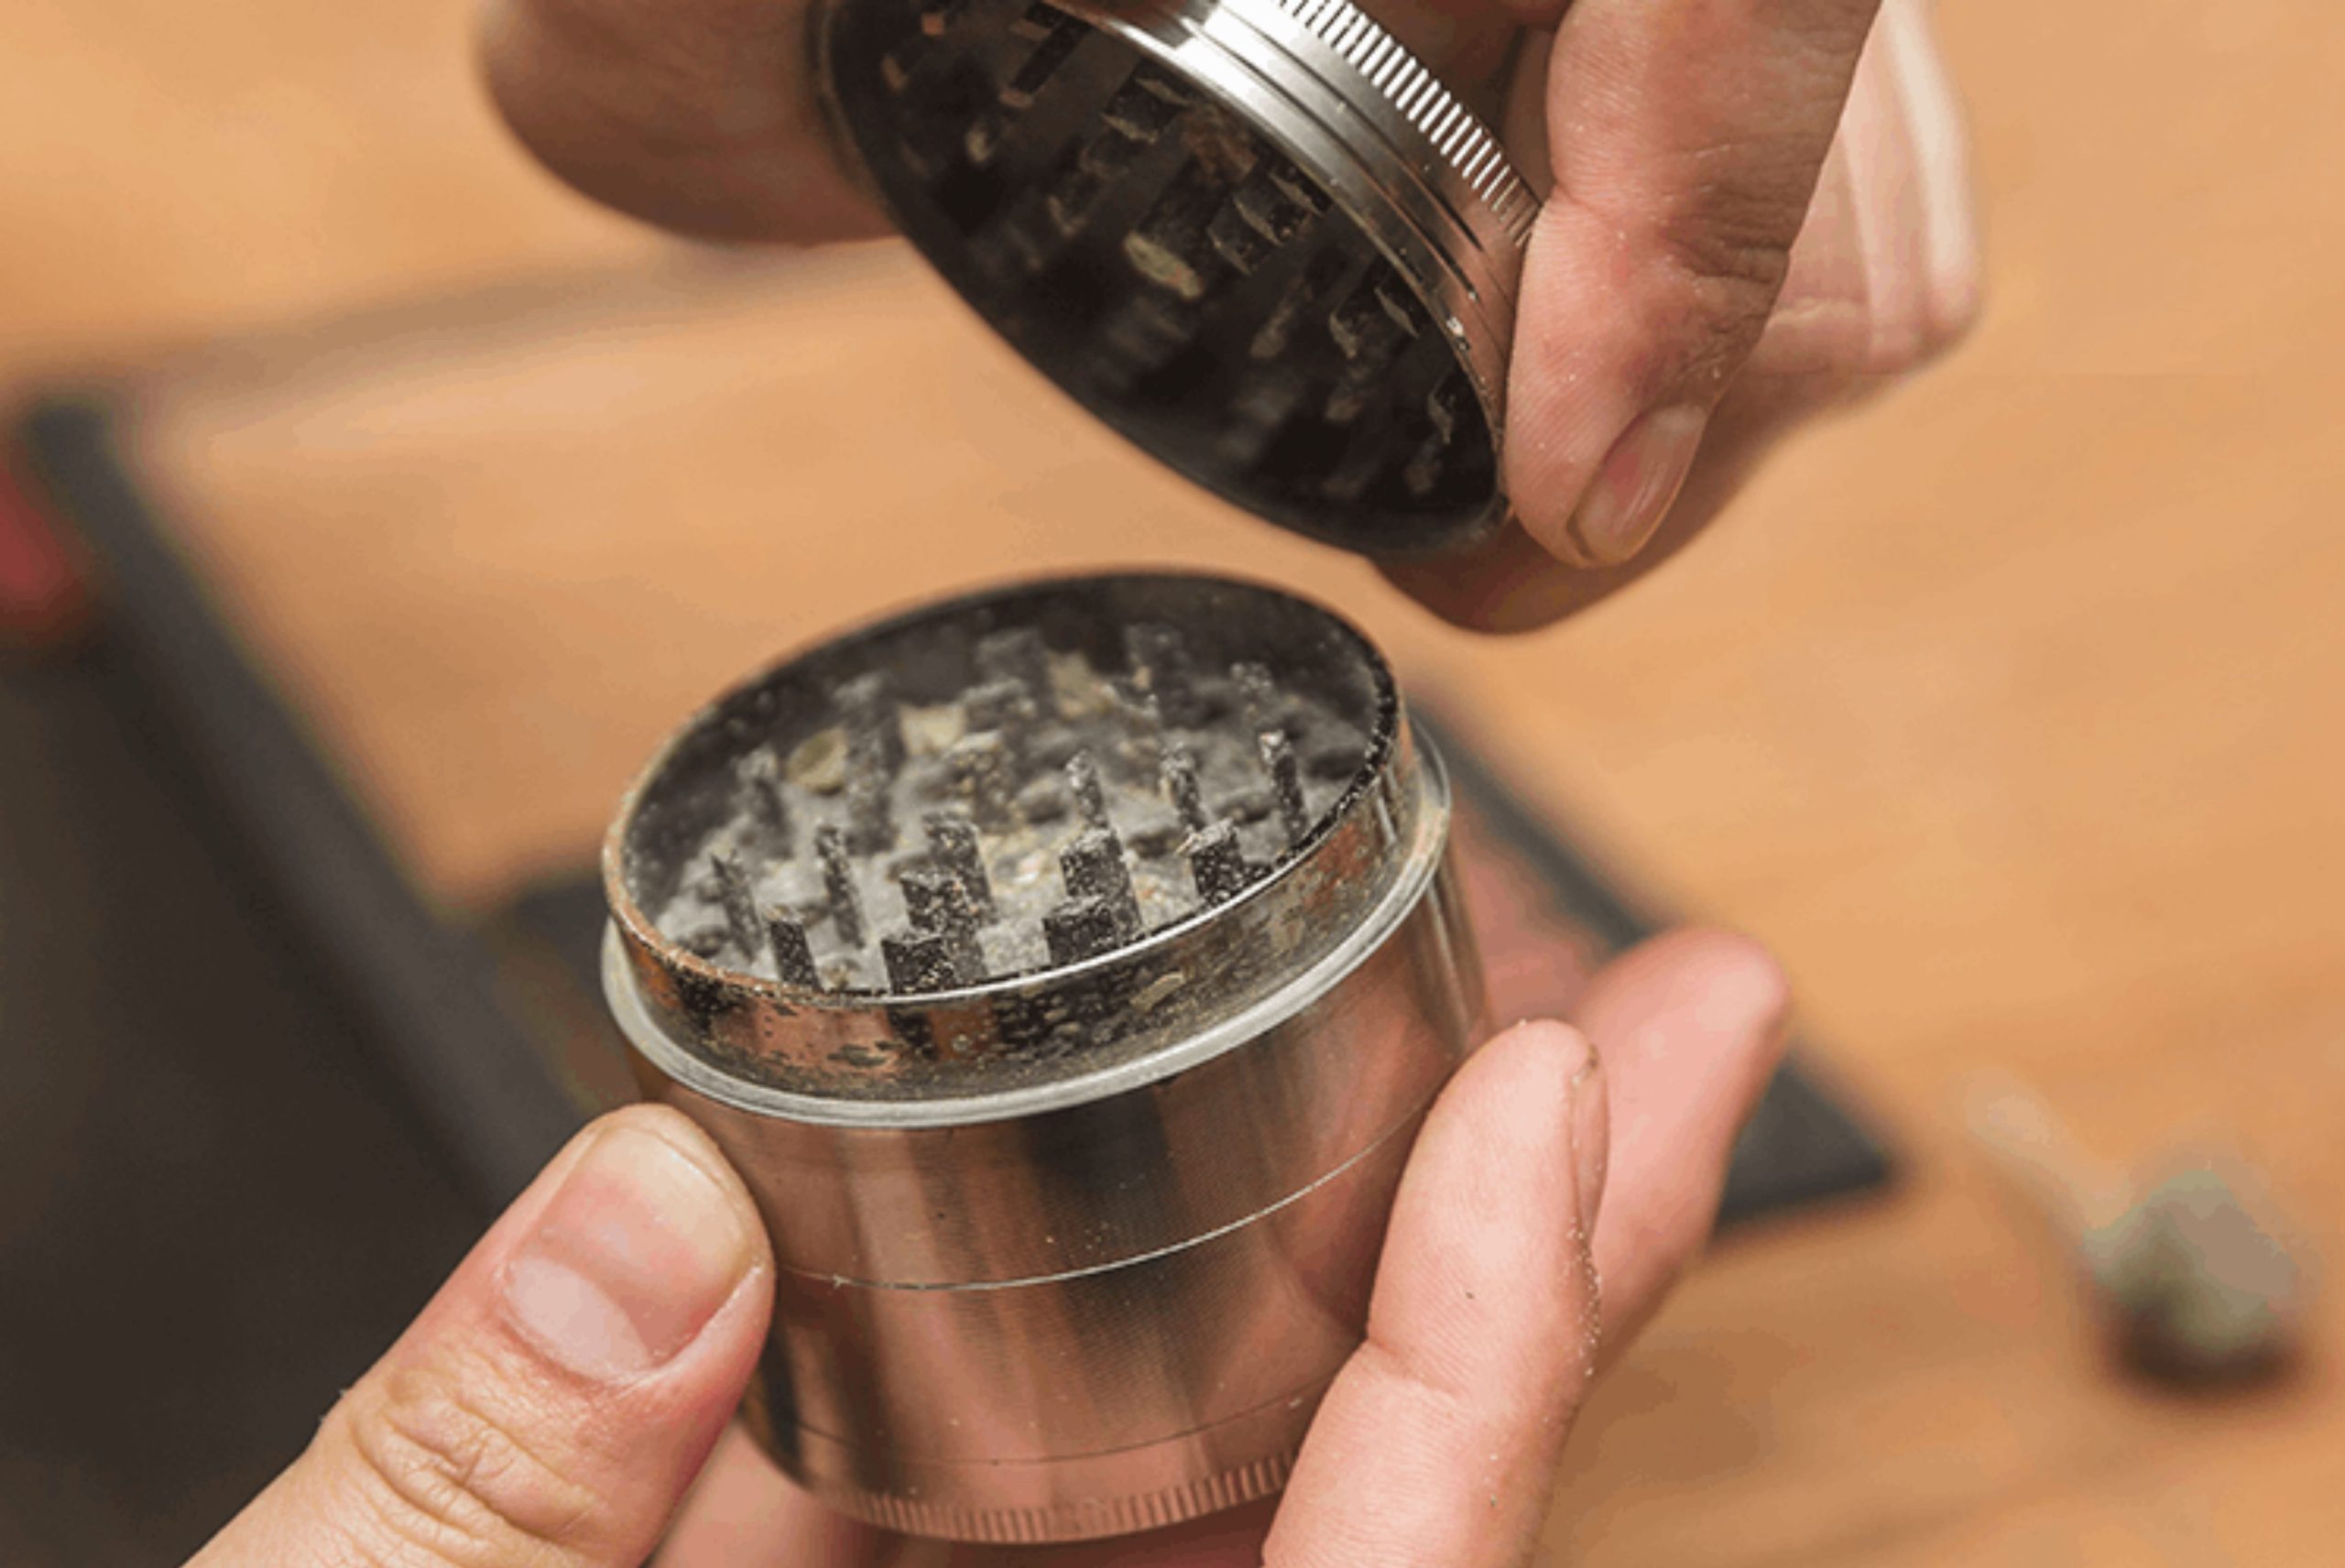 In this expert guide, we'll learn about how to use a weed grinder, including why it's beneficial and how to do it step-by-step. Keep on reading blog.